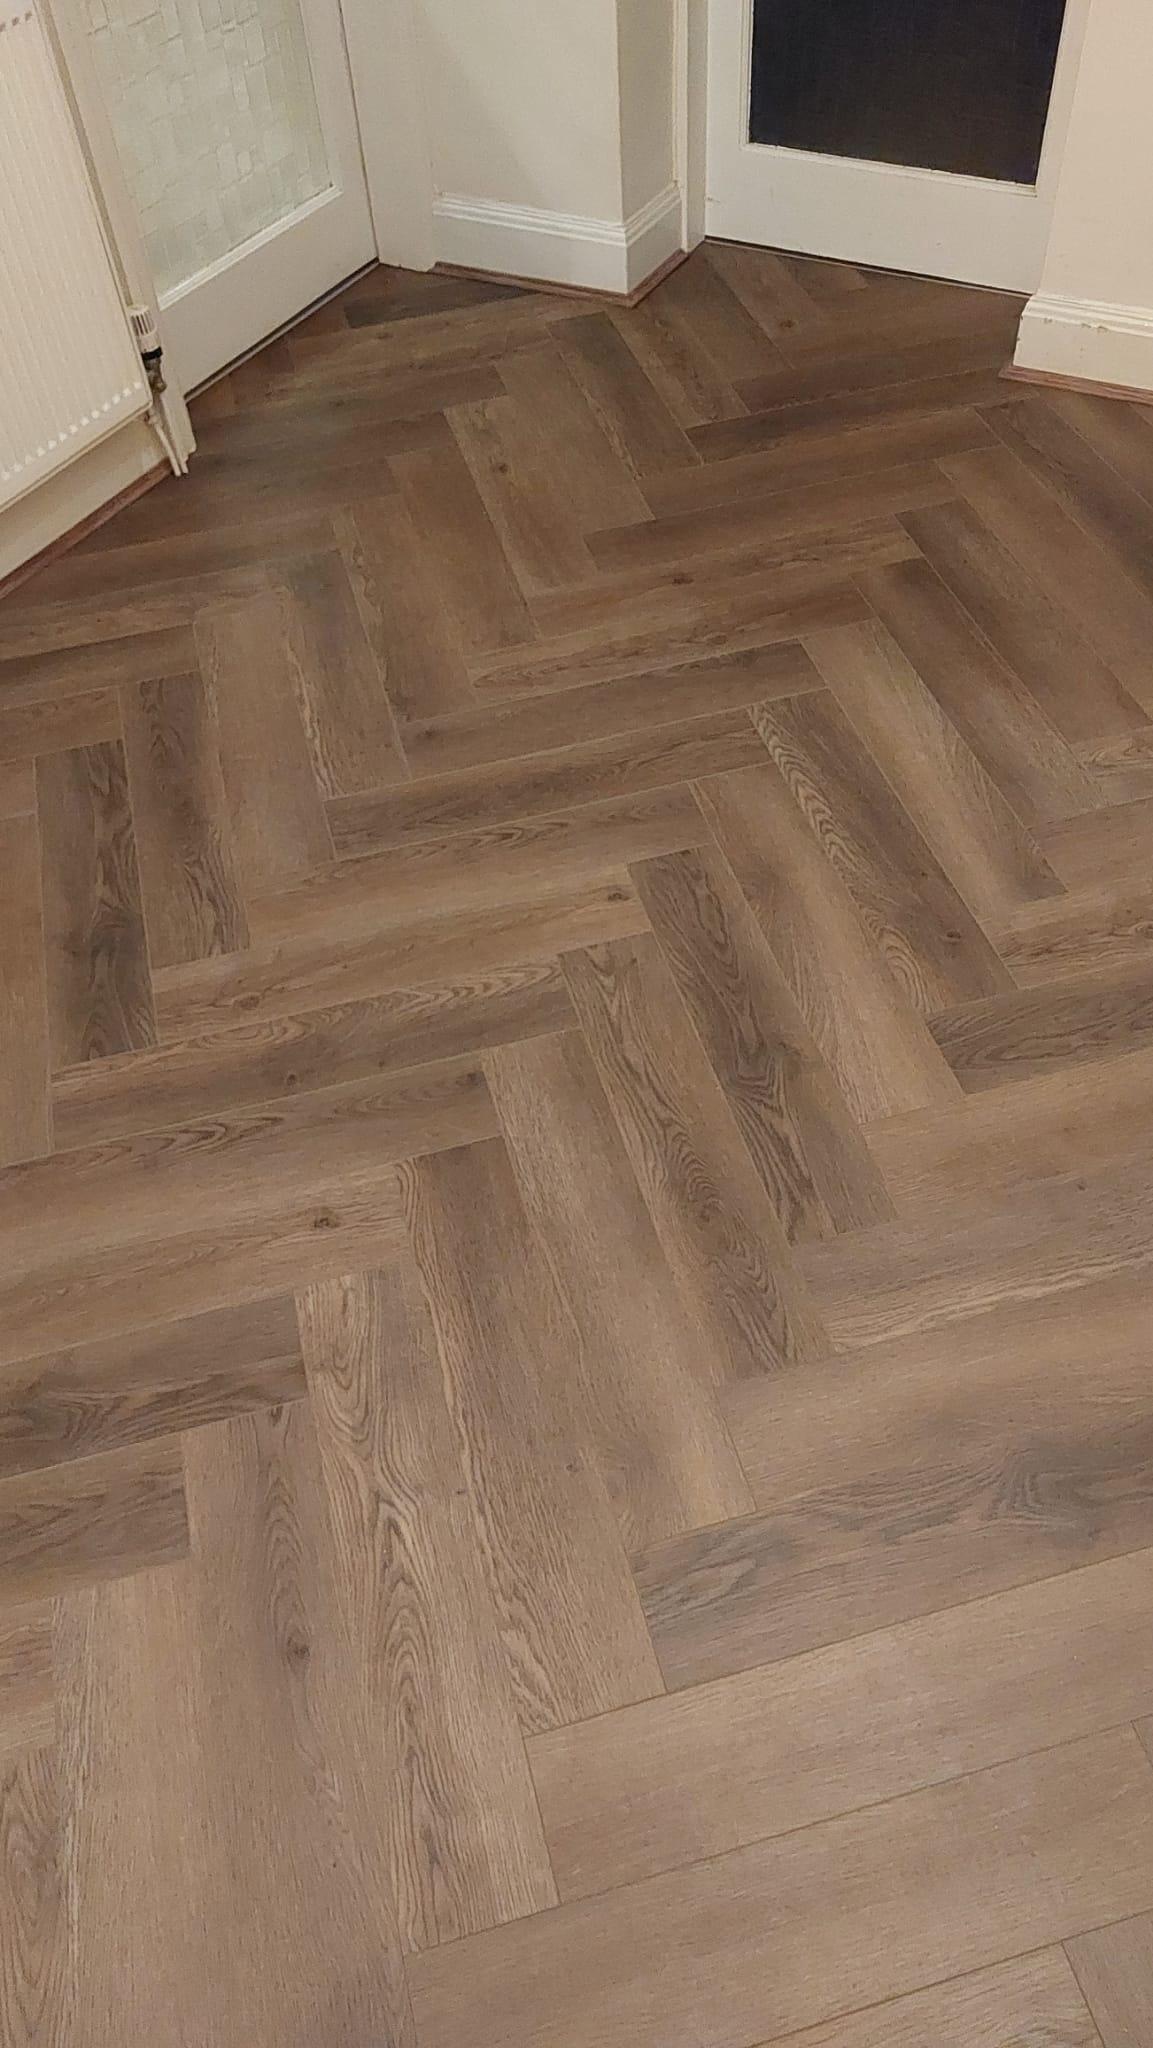 Herringbone Flooring - Book a Free quote with Bridge Flooring - we come to you!